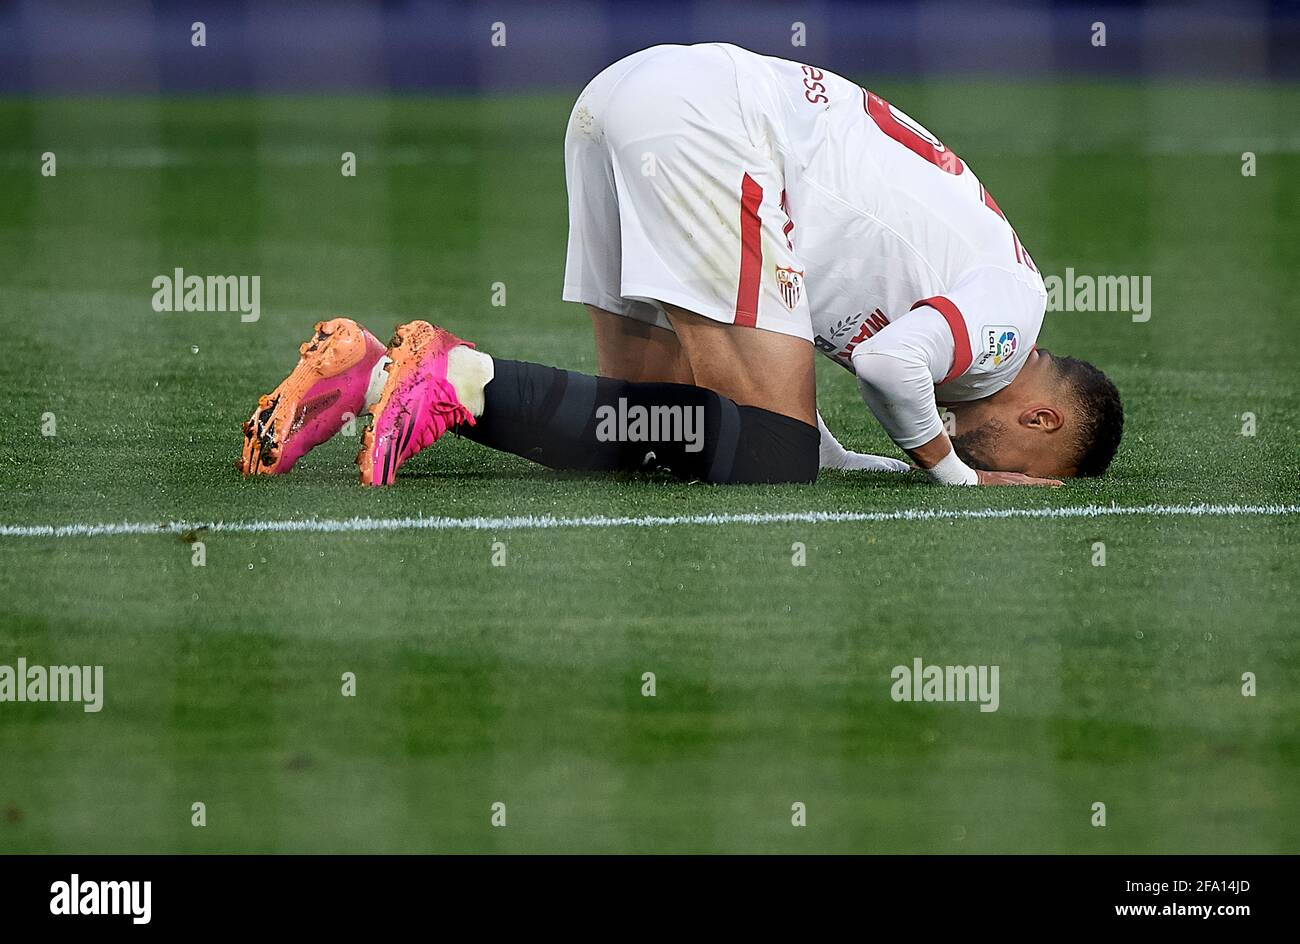 Valencia, Spain. 21st Apr, 2021. Youssef En-Nesyri of Sevilla celebrates during a Spanish League football match between Levante UD and Sevilla CF in Valencia, Spain, on April 21, 2021. Credit: Pablo Morano/Xinhua/Alamy Live News Stock Photo